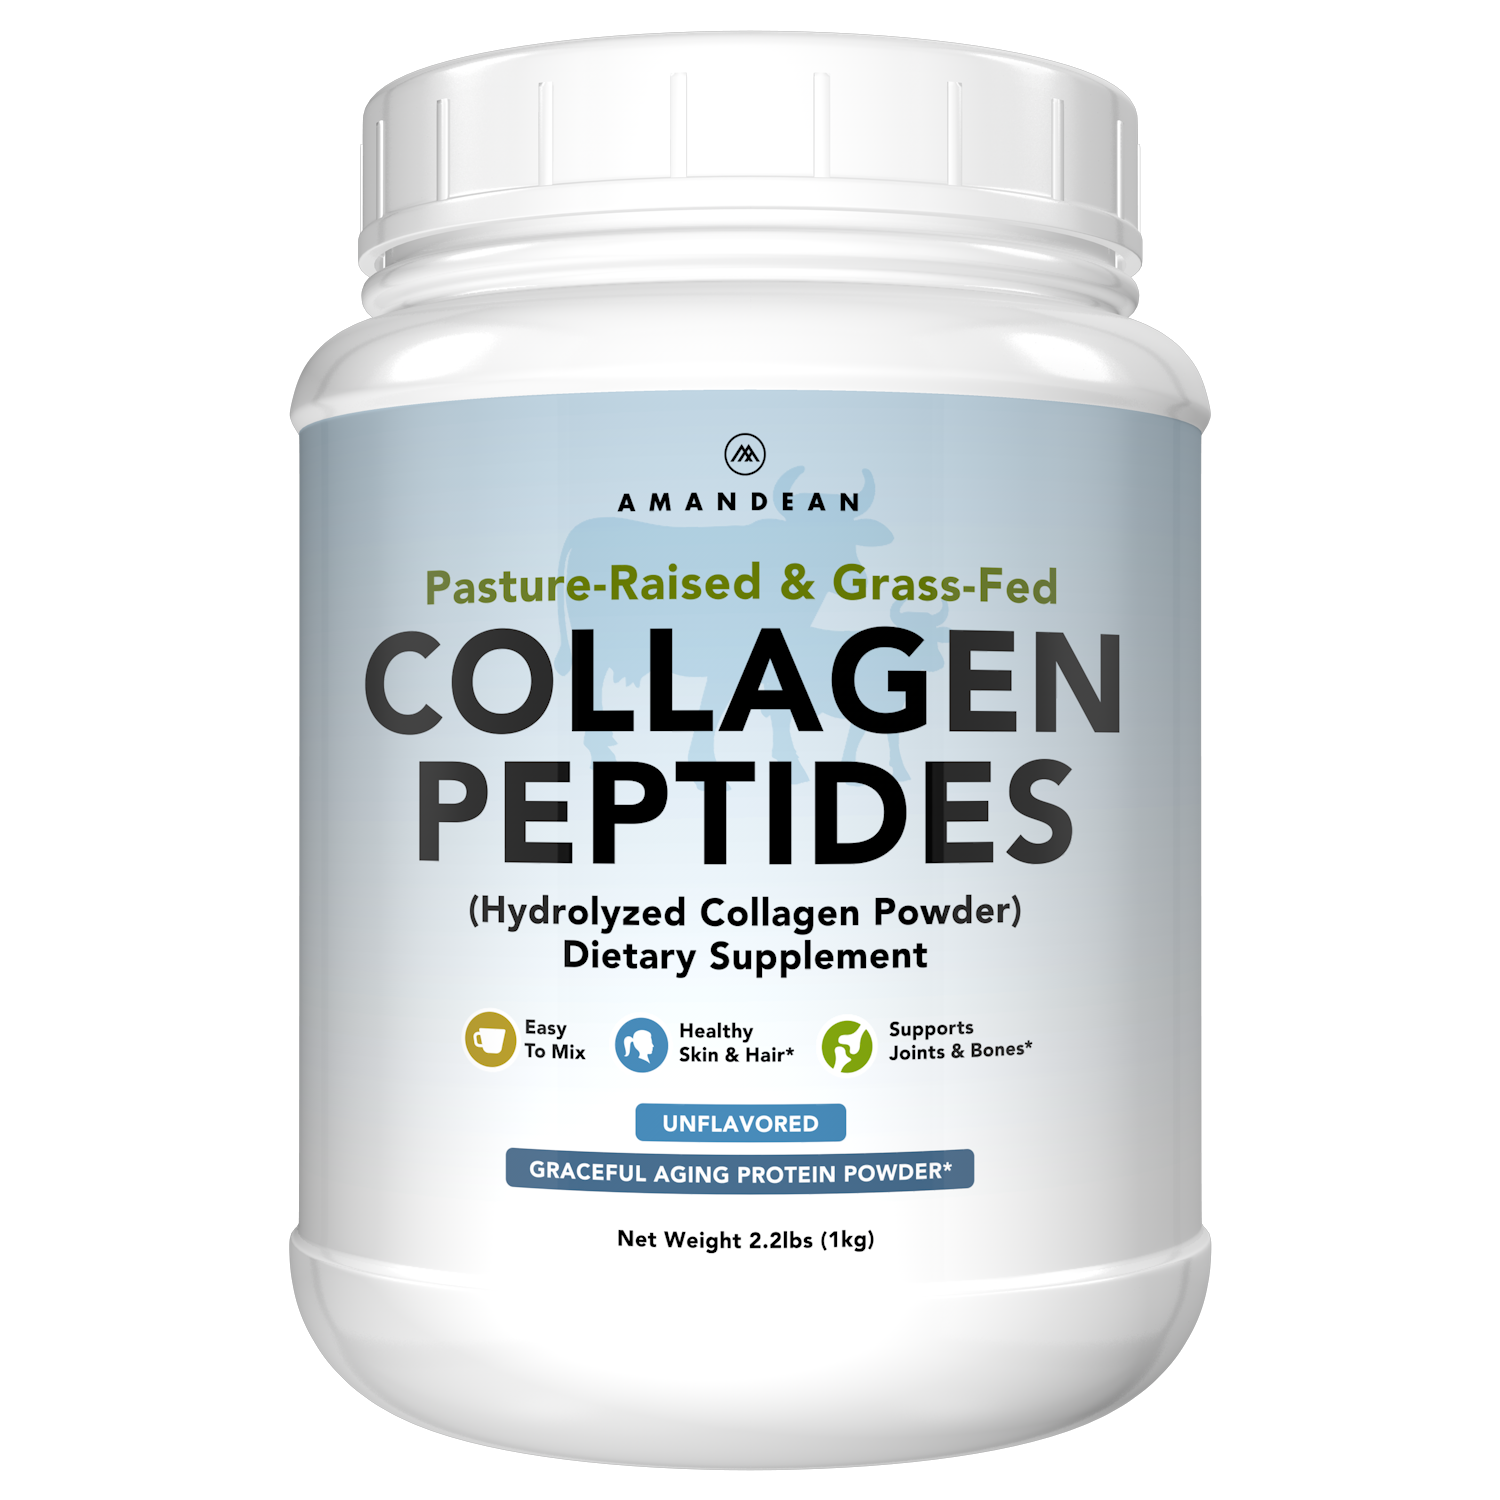 Amandean XL Grass-Fed, Pasture-Raised Collagen Peptides for Graceful Aging, Skin, Hair, Nails, Joints, Bones, Tendons, Flexibility, Lean Muscle, and a Healthy Metabolism.